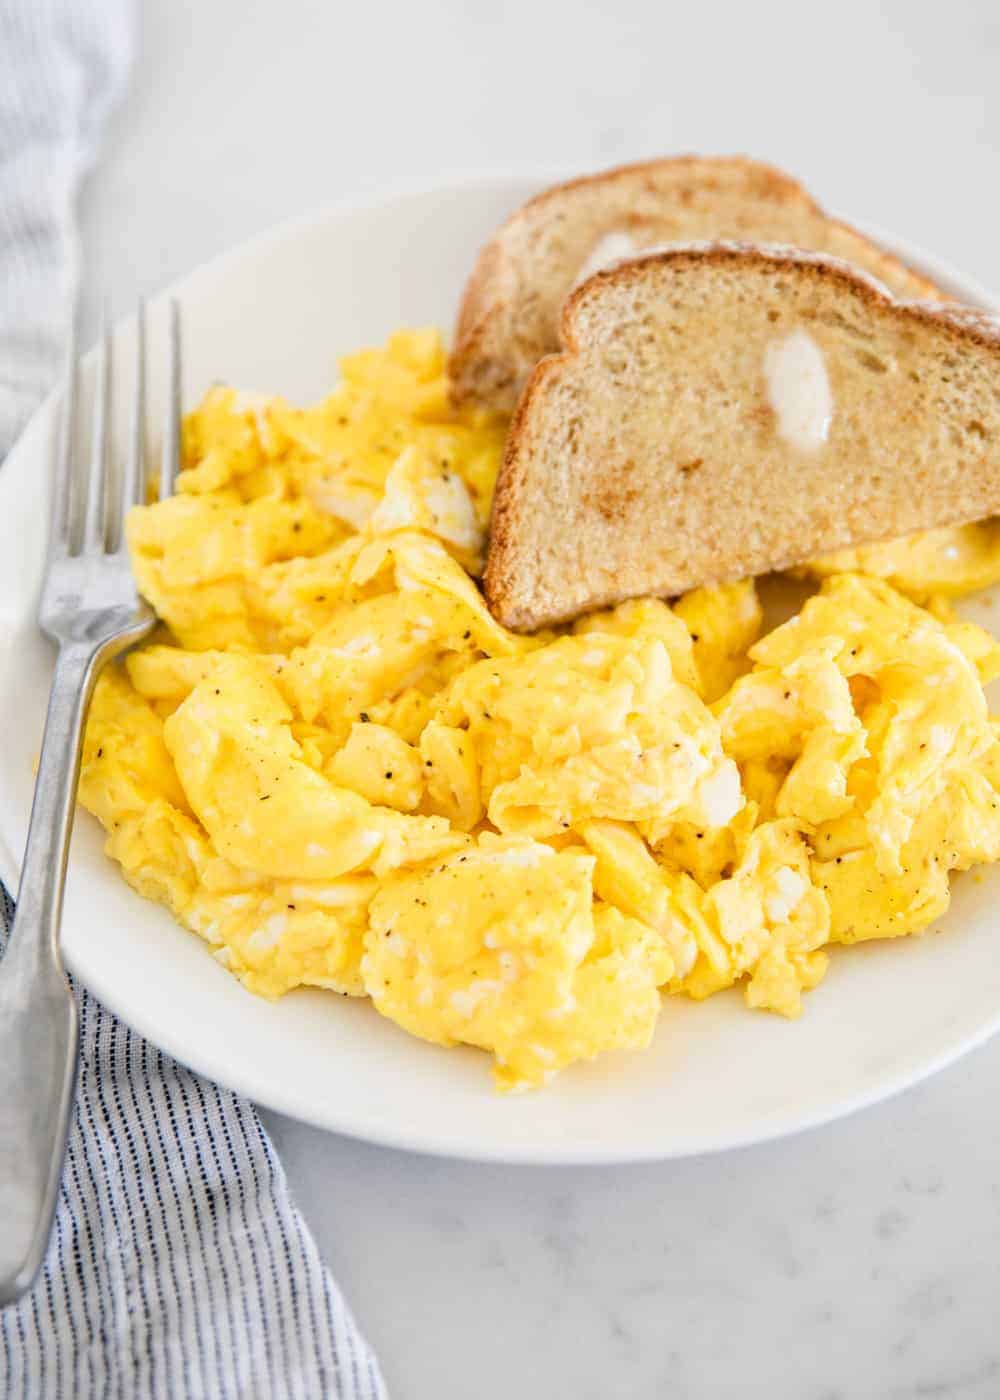 Scrambled eggs on white plate with toast.